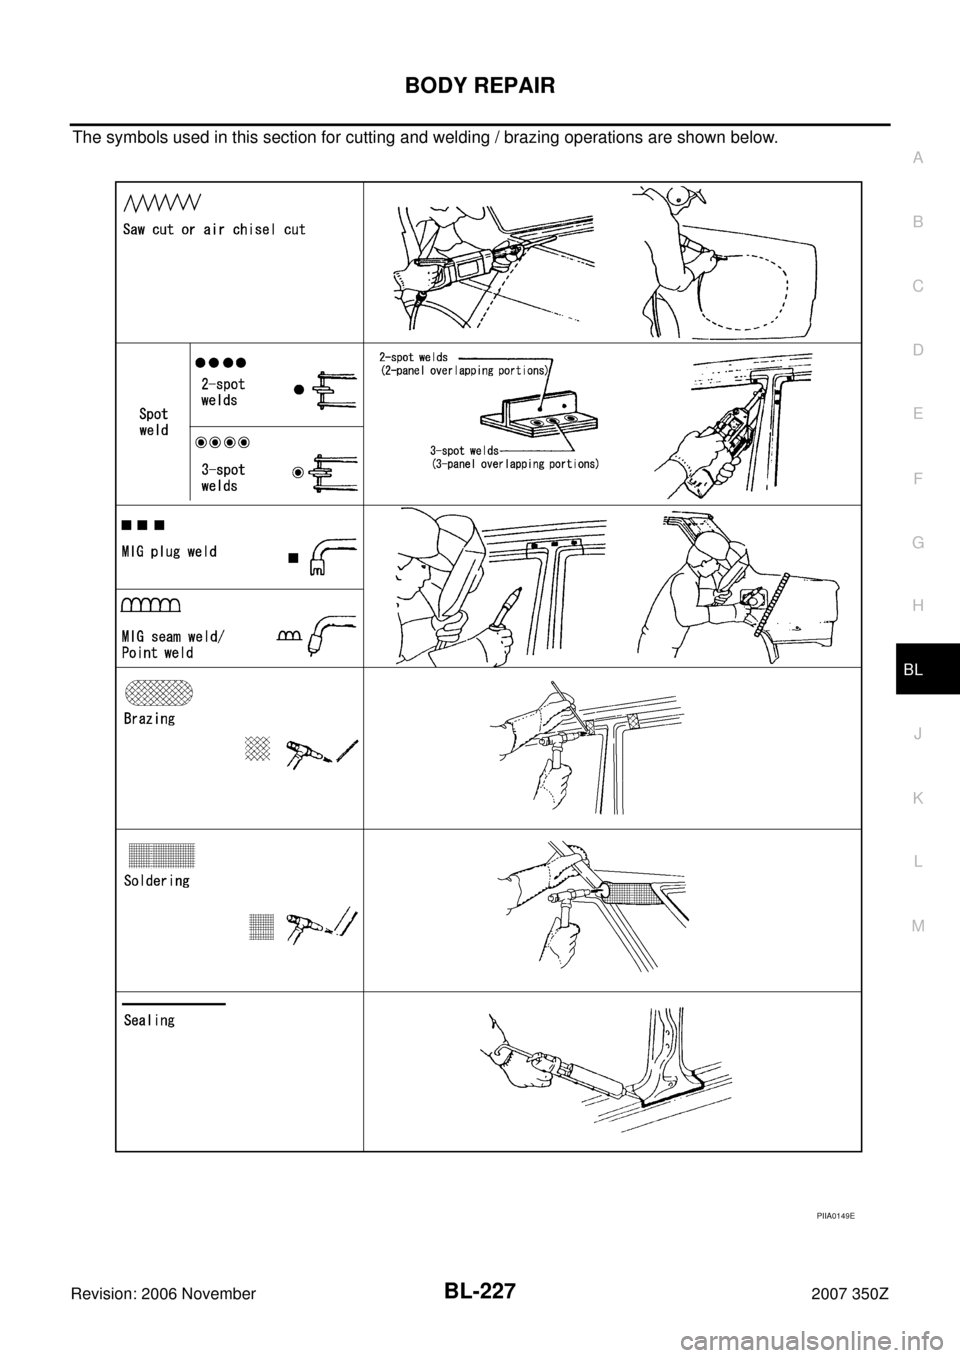 NISSAN 350Z 2007 Z33 Body, Lock And Security System Workshop Manual BODY REPAIR
BL-227
C
D
E
F
G
H
J
K
L
MA
B
BL
Revision: 2006 November2007 350Z
The symbols used in this section for cutting and welding / brazing operations are shown below.
PIIA0149E 